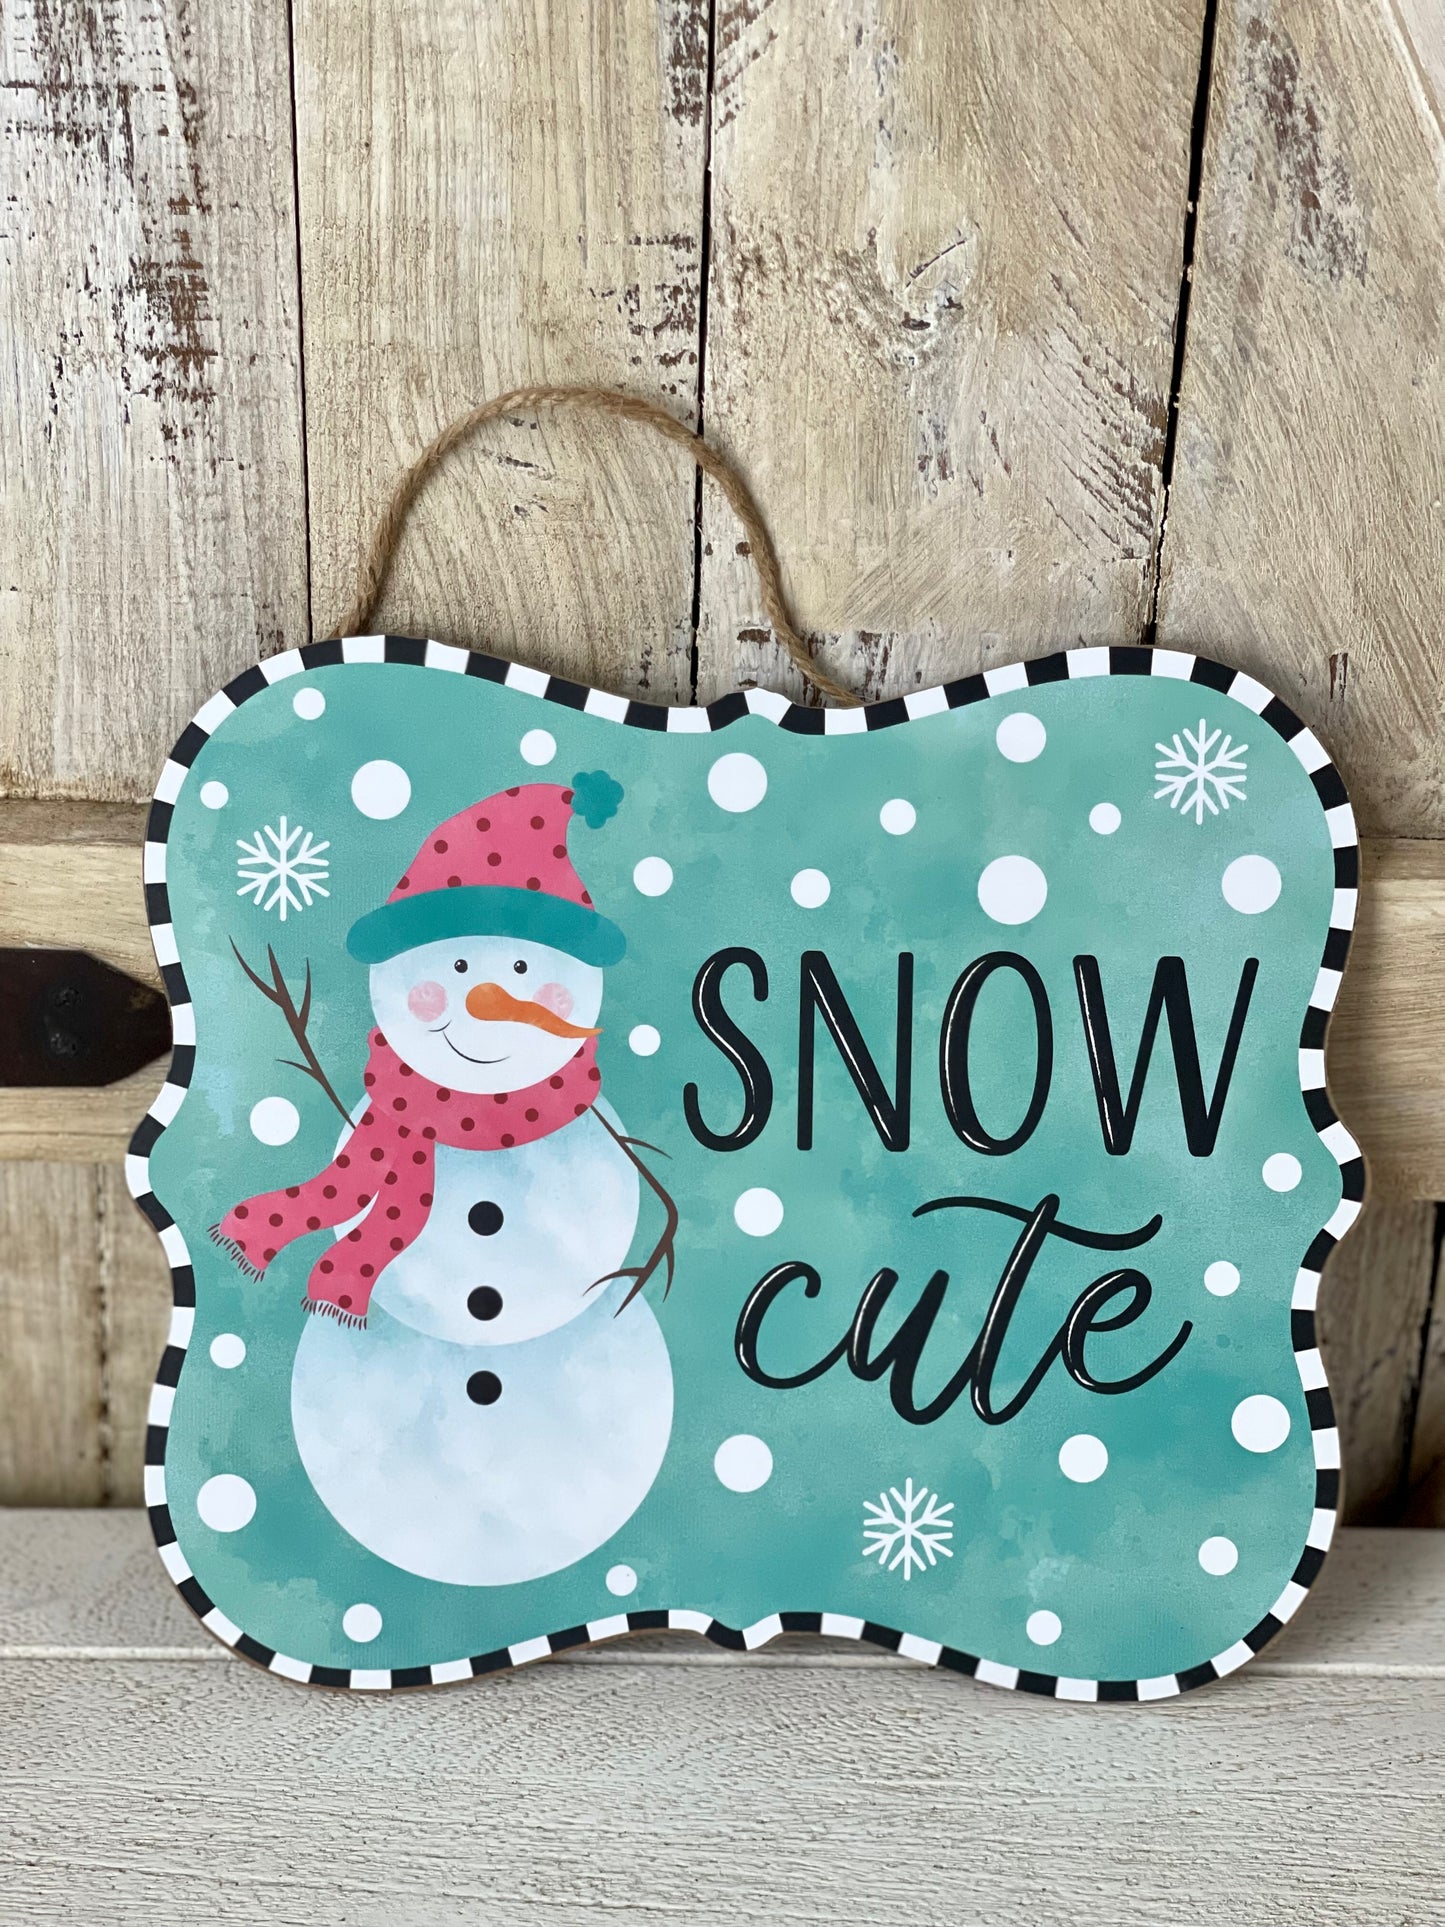 Snow Cute Wooden Sign